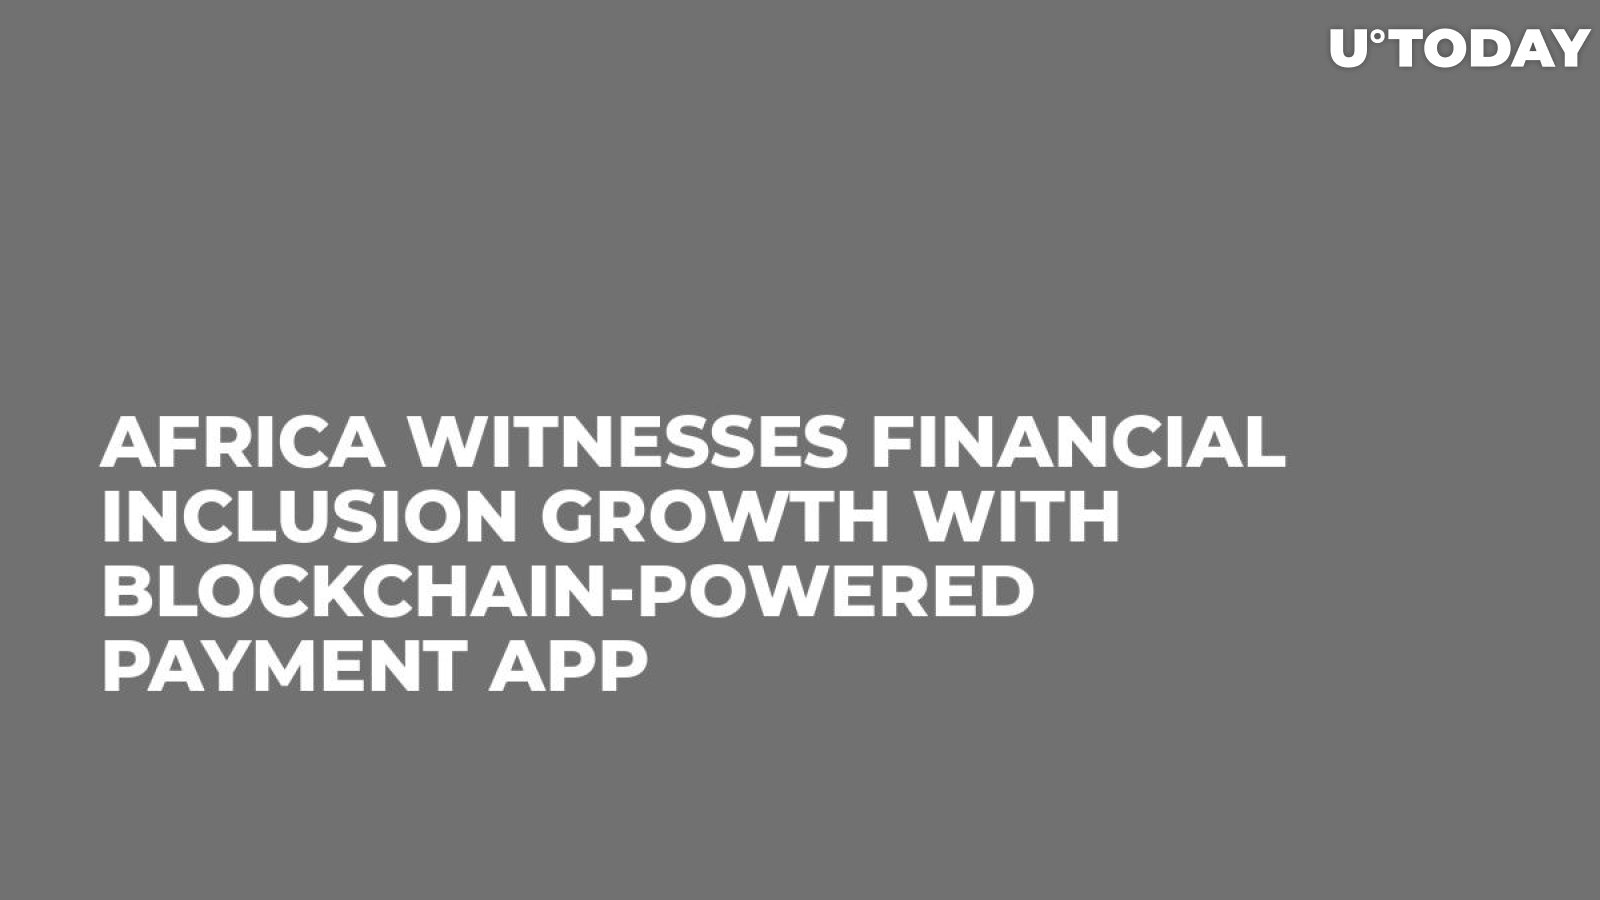 Africa Witnesses Financial Inclusion Growth With Blockchain-Powered Payment App 